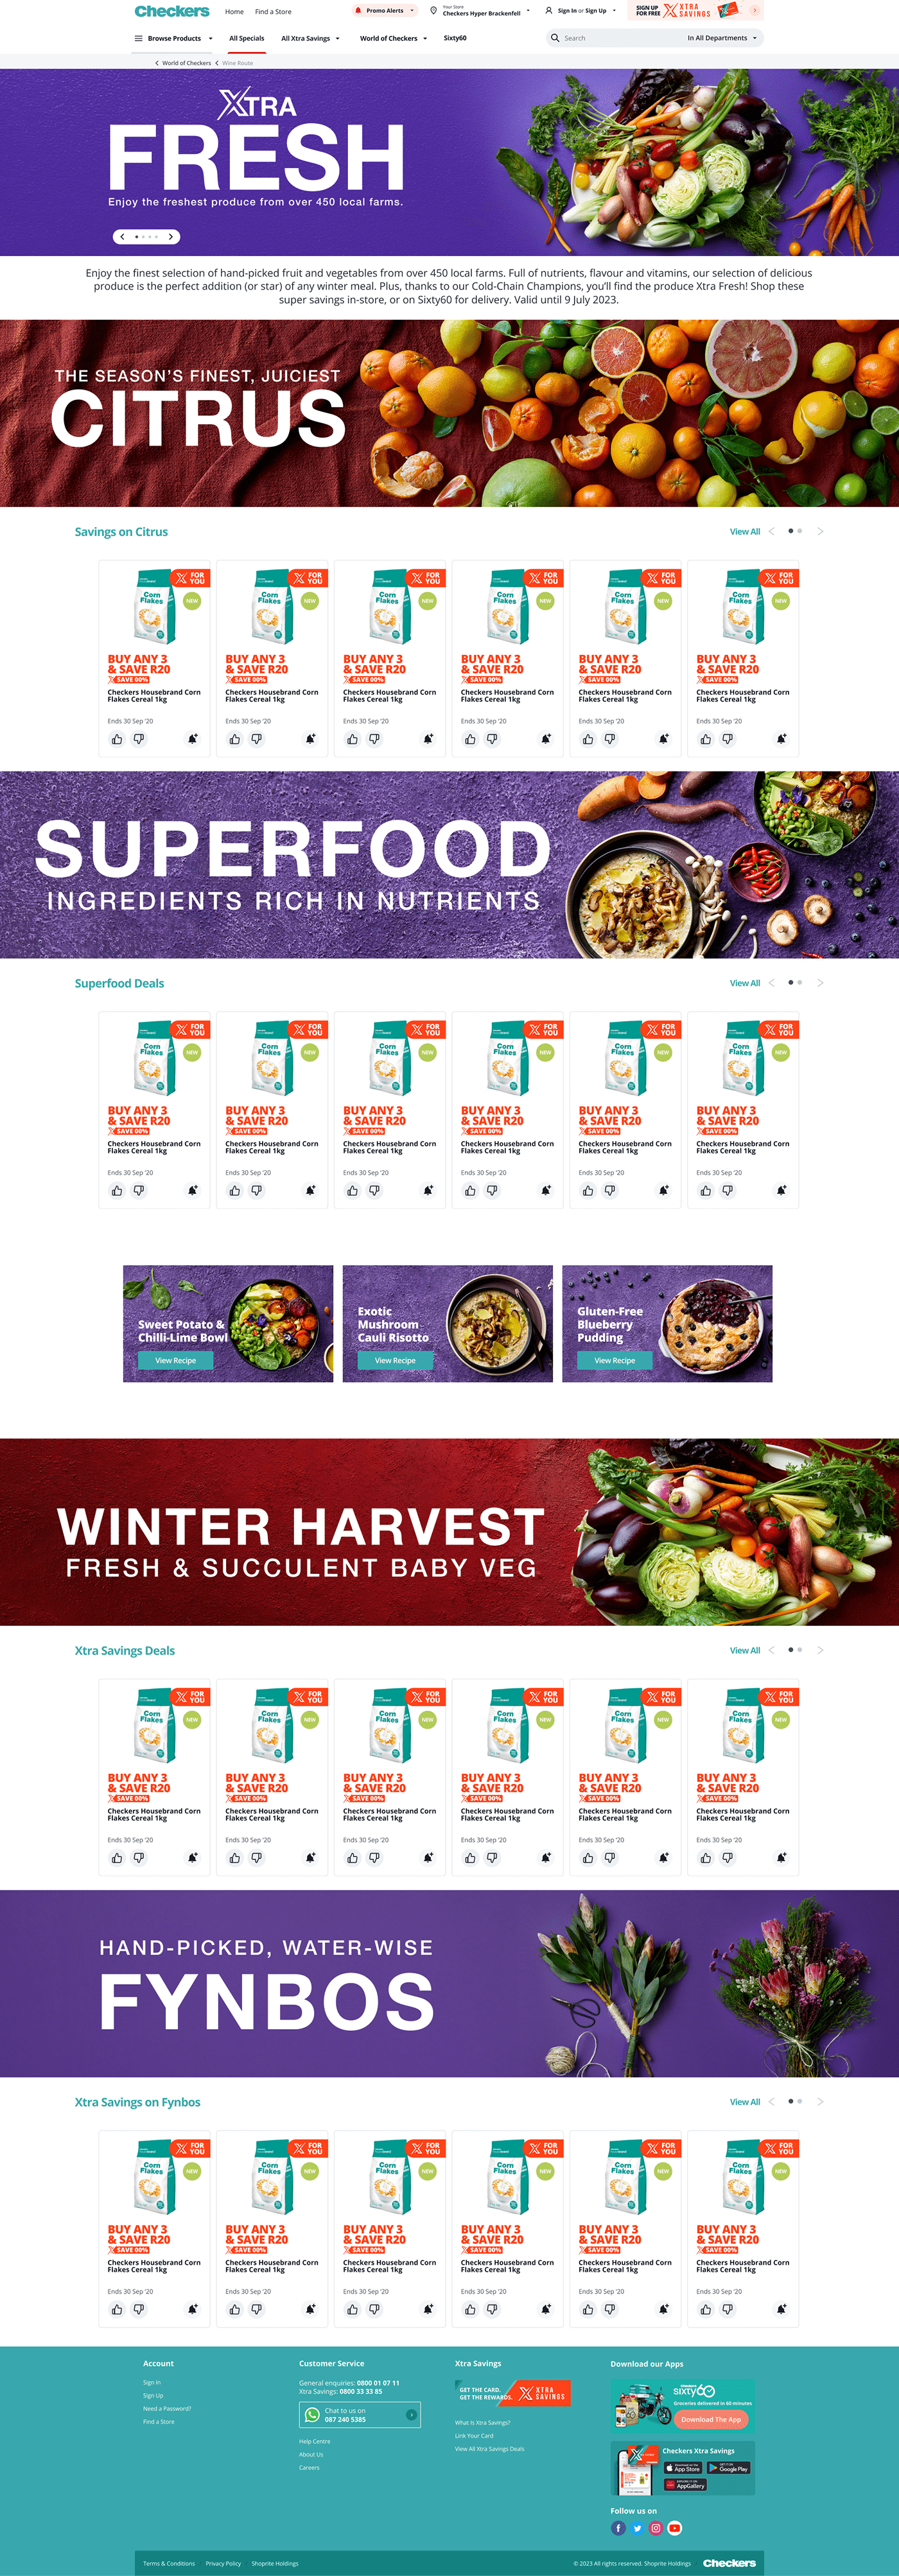 Supermarket winter fresh Fruit vegetables checkers digital campaign xtra Grocery store Food 